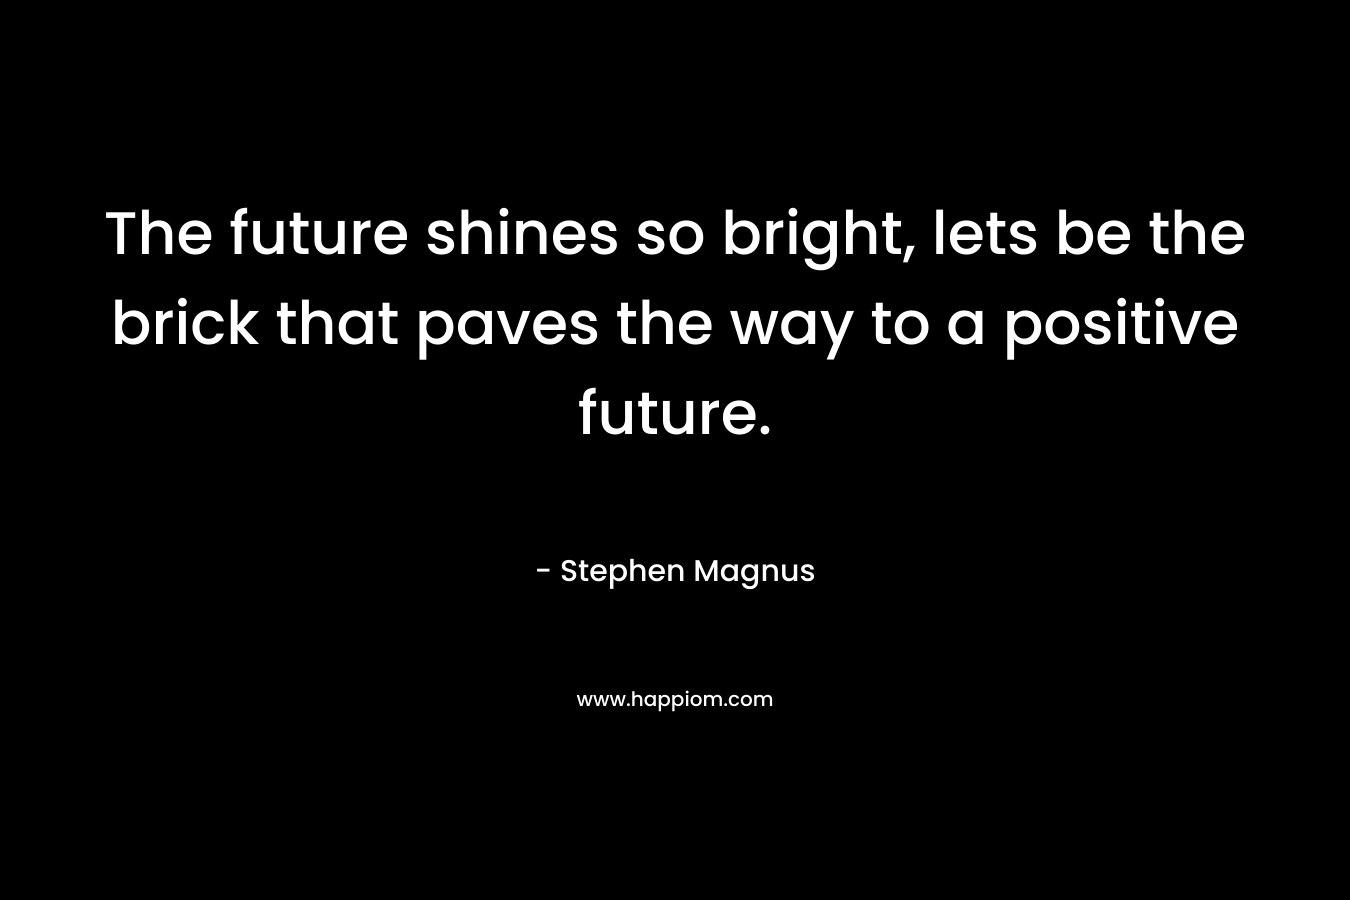 The future shines so bright, lets be the brick that paves the way to a positive future. – Stephen Magnus